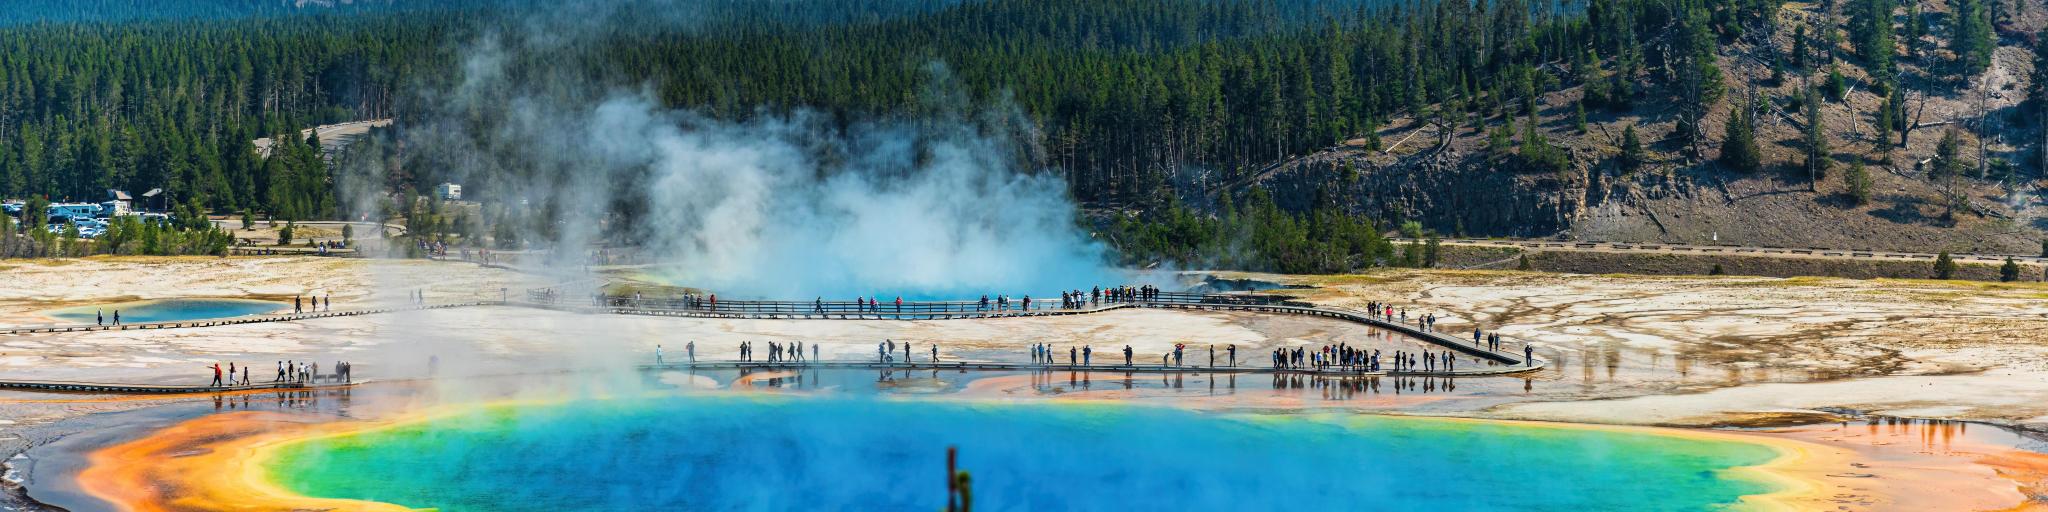 Wide view of Grand Prismatic Spring and viewing platform, with blue and yellow waters and surrounding forests